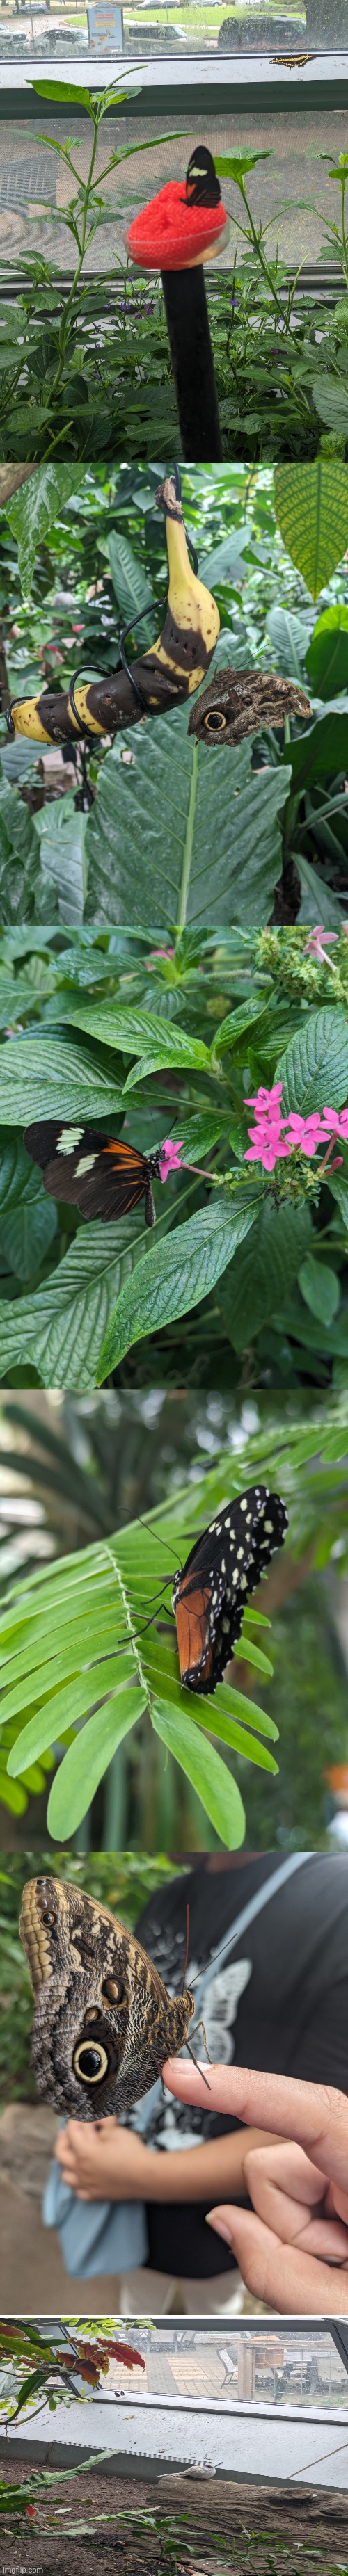 Took some pictures of butterflies and a bird | image tagged in butterfly,photos | made w/ Imgflip meme maker